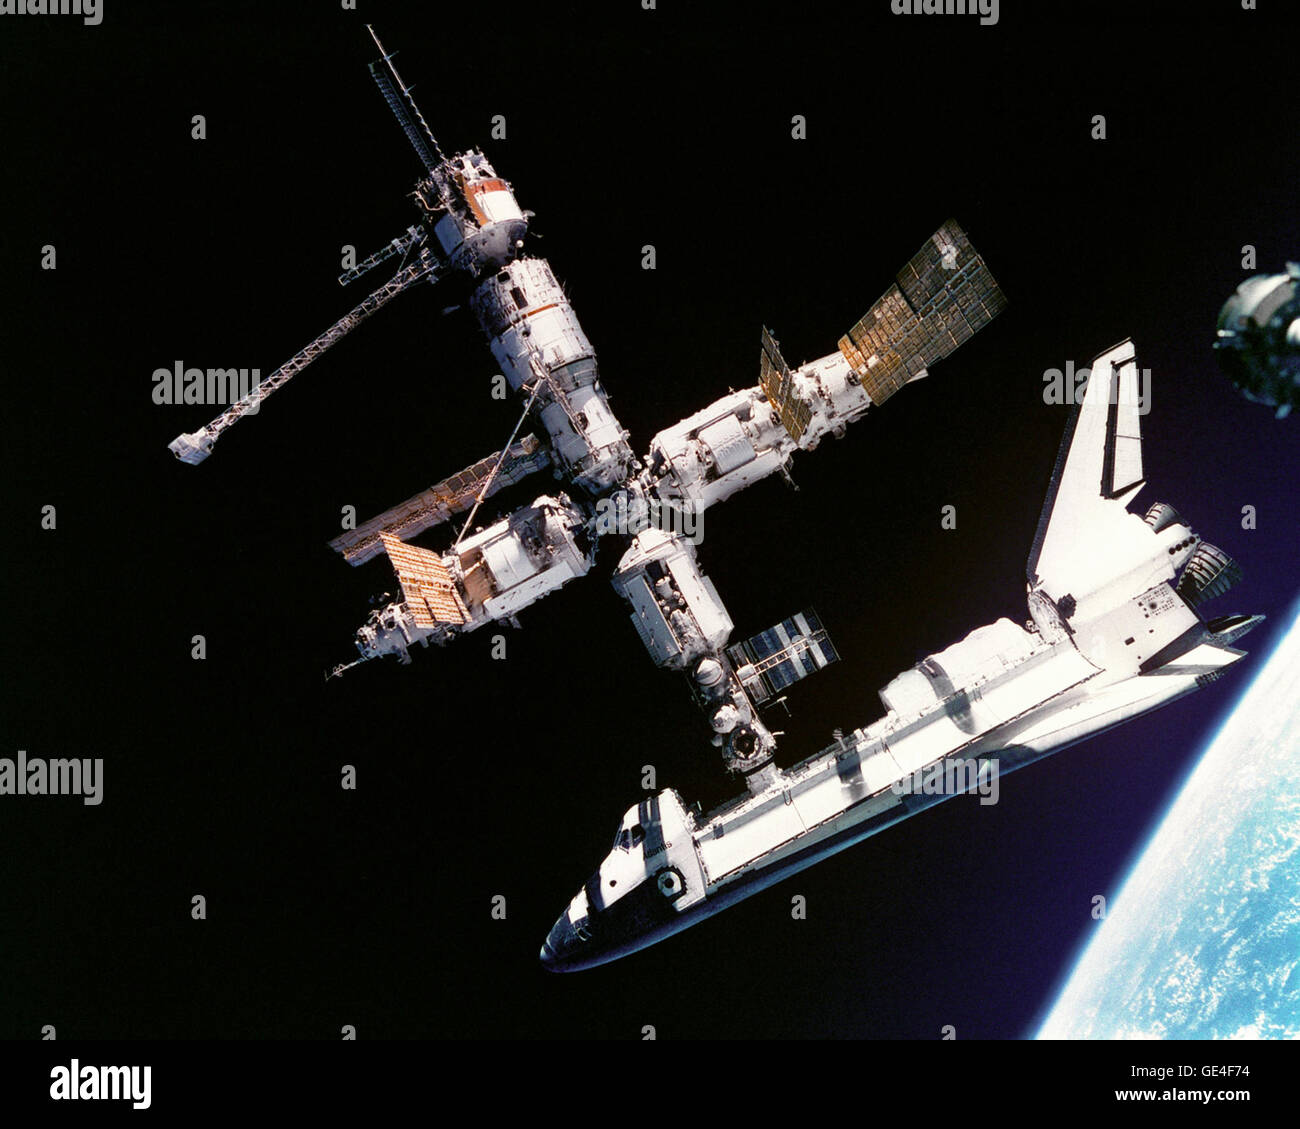 This view of the Space Shuttle Atlantis still connected to Russia's Mir Space Station was photographed by the Mir-19 crew on July 4, 1995. Cosmonauts Anatoliy Y. Solovyev and Nikolai M. Budarin, Mir-19 Commander and Flight Engineer, respectively, temporarily undocked the Soyuz spacecraft from the cluster of Mir elements to perform a brief fly-around. They took pictures while the STS-71 crew, with Mir-18's three crew members aboard, undocked Atlantis for the completion of this leg of the joint activities. Solovyev and Budarin had been taxied to the Mir Space Station by the STS-71 ascent trip of Stock Photo